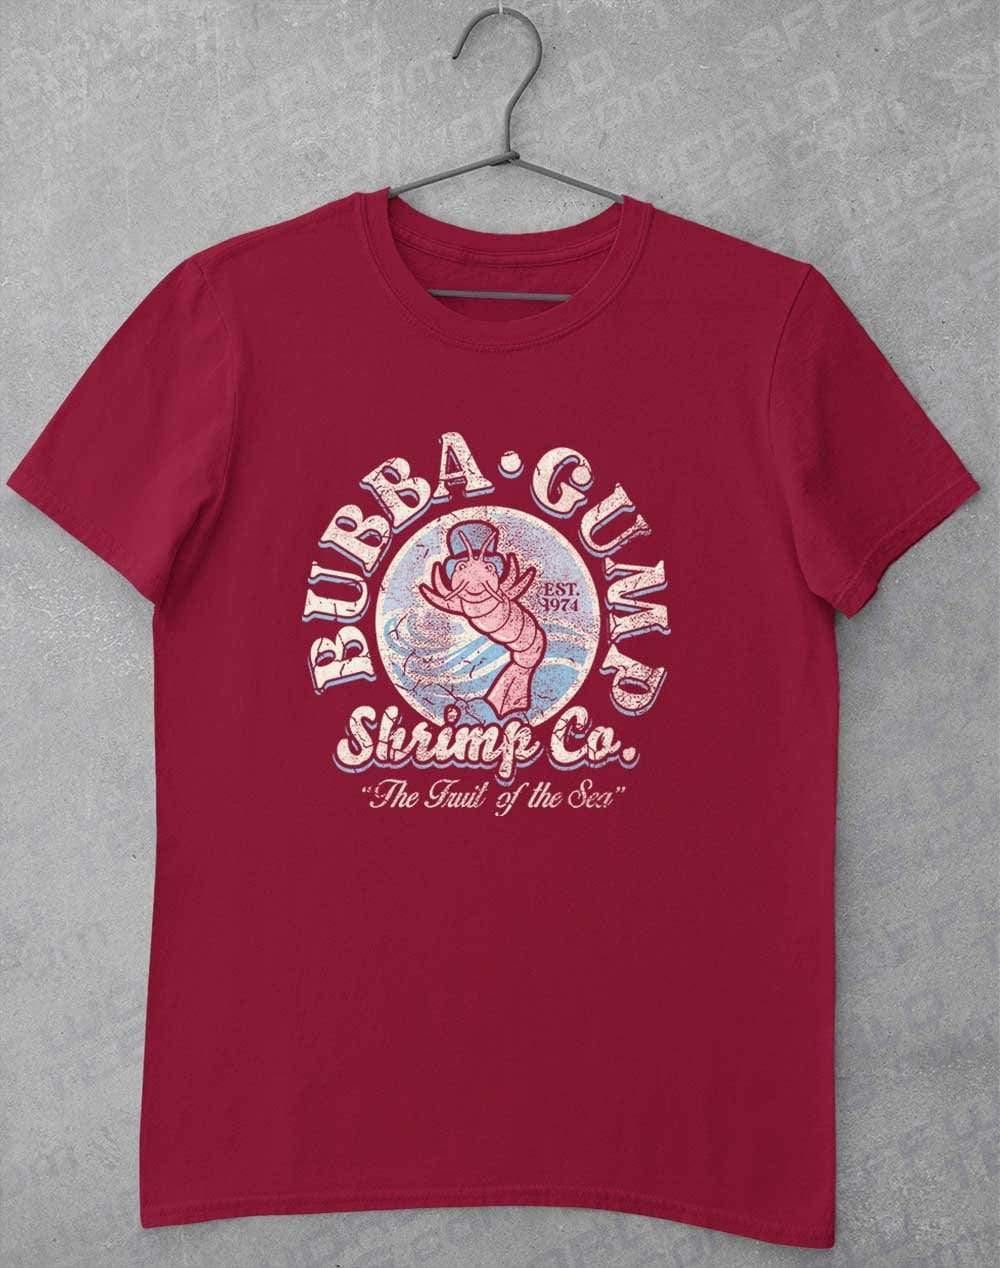 Bubba Gump Shrimp Co T-Shirt S / Red  - Off World Tees